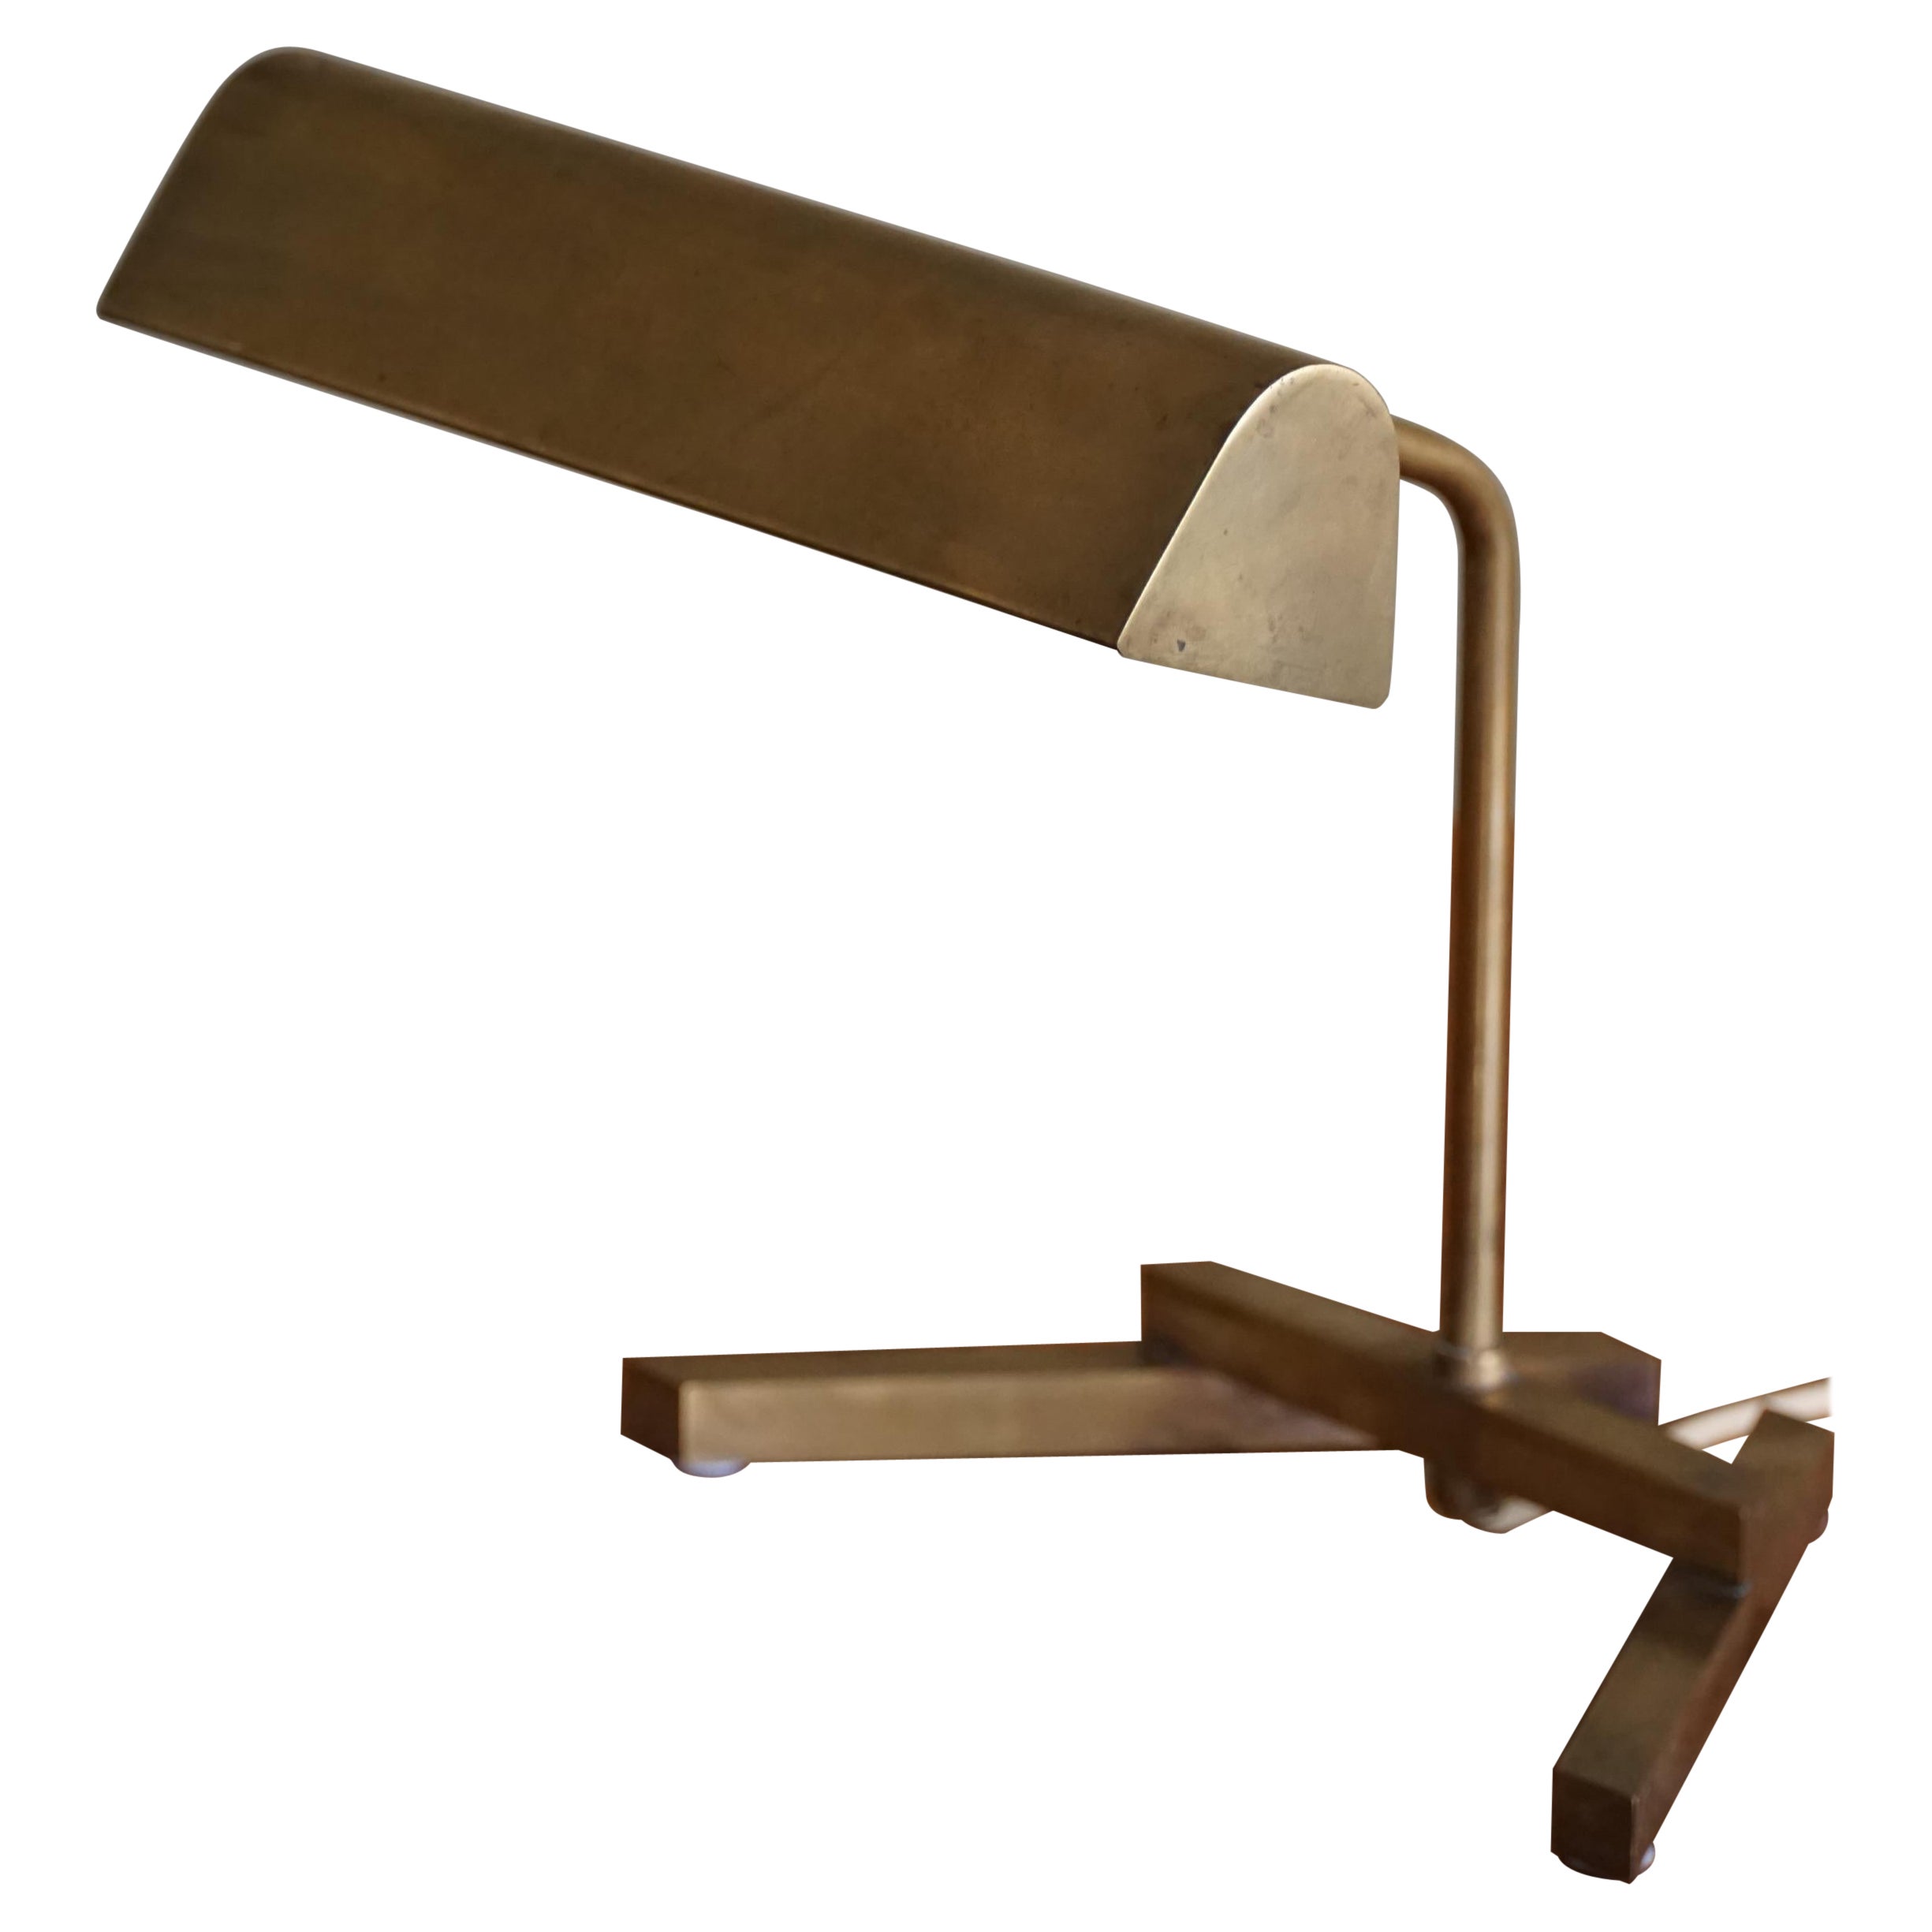 Danish Mid Century Modern, Geometric Table Lamp in Brass from the 1950s For Sale